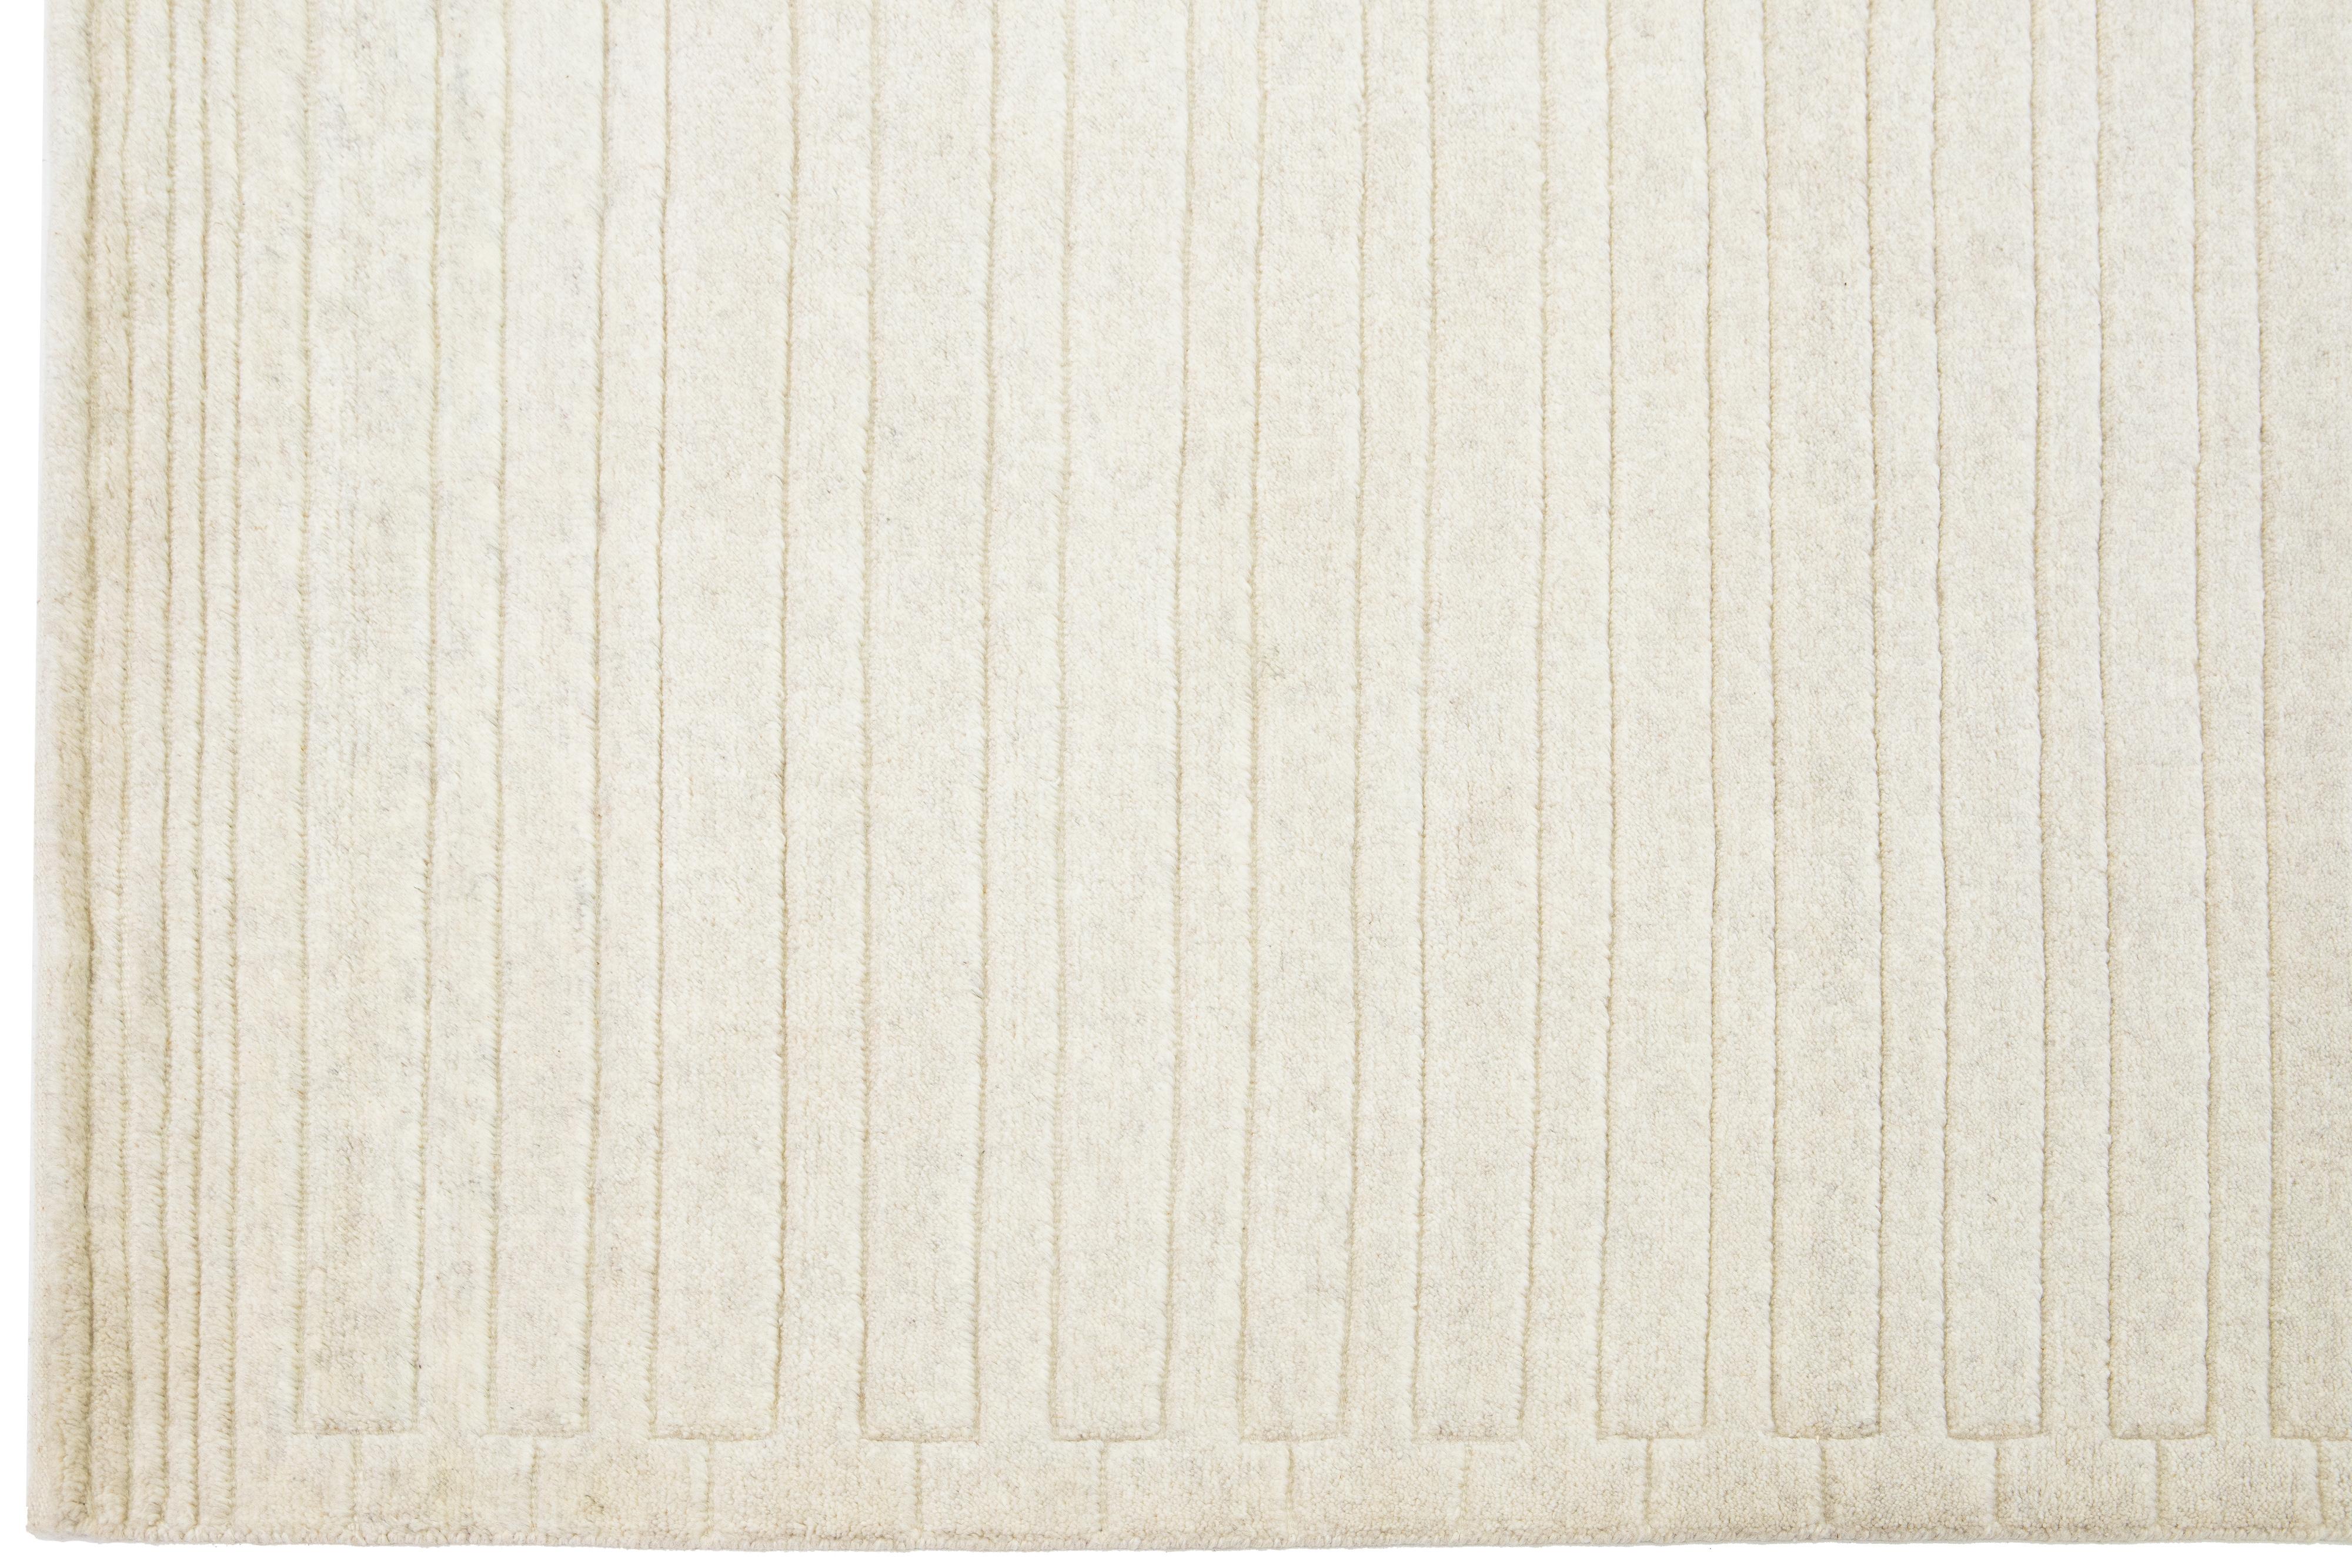 Ivory Moroccan Style Contemporary Wool Rug With a Striped Pattern By Apadana In New Condition For Sale In Norwalk, CT